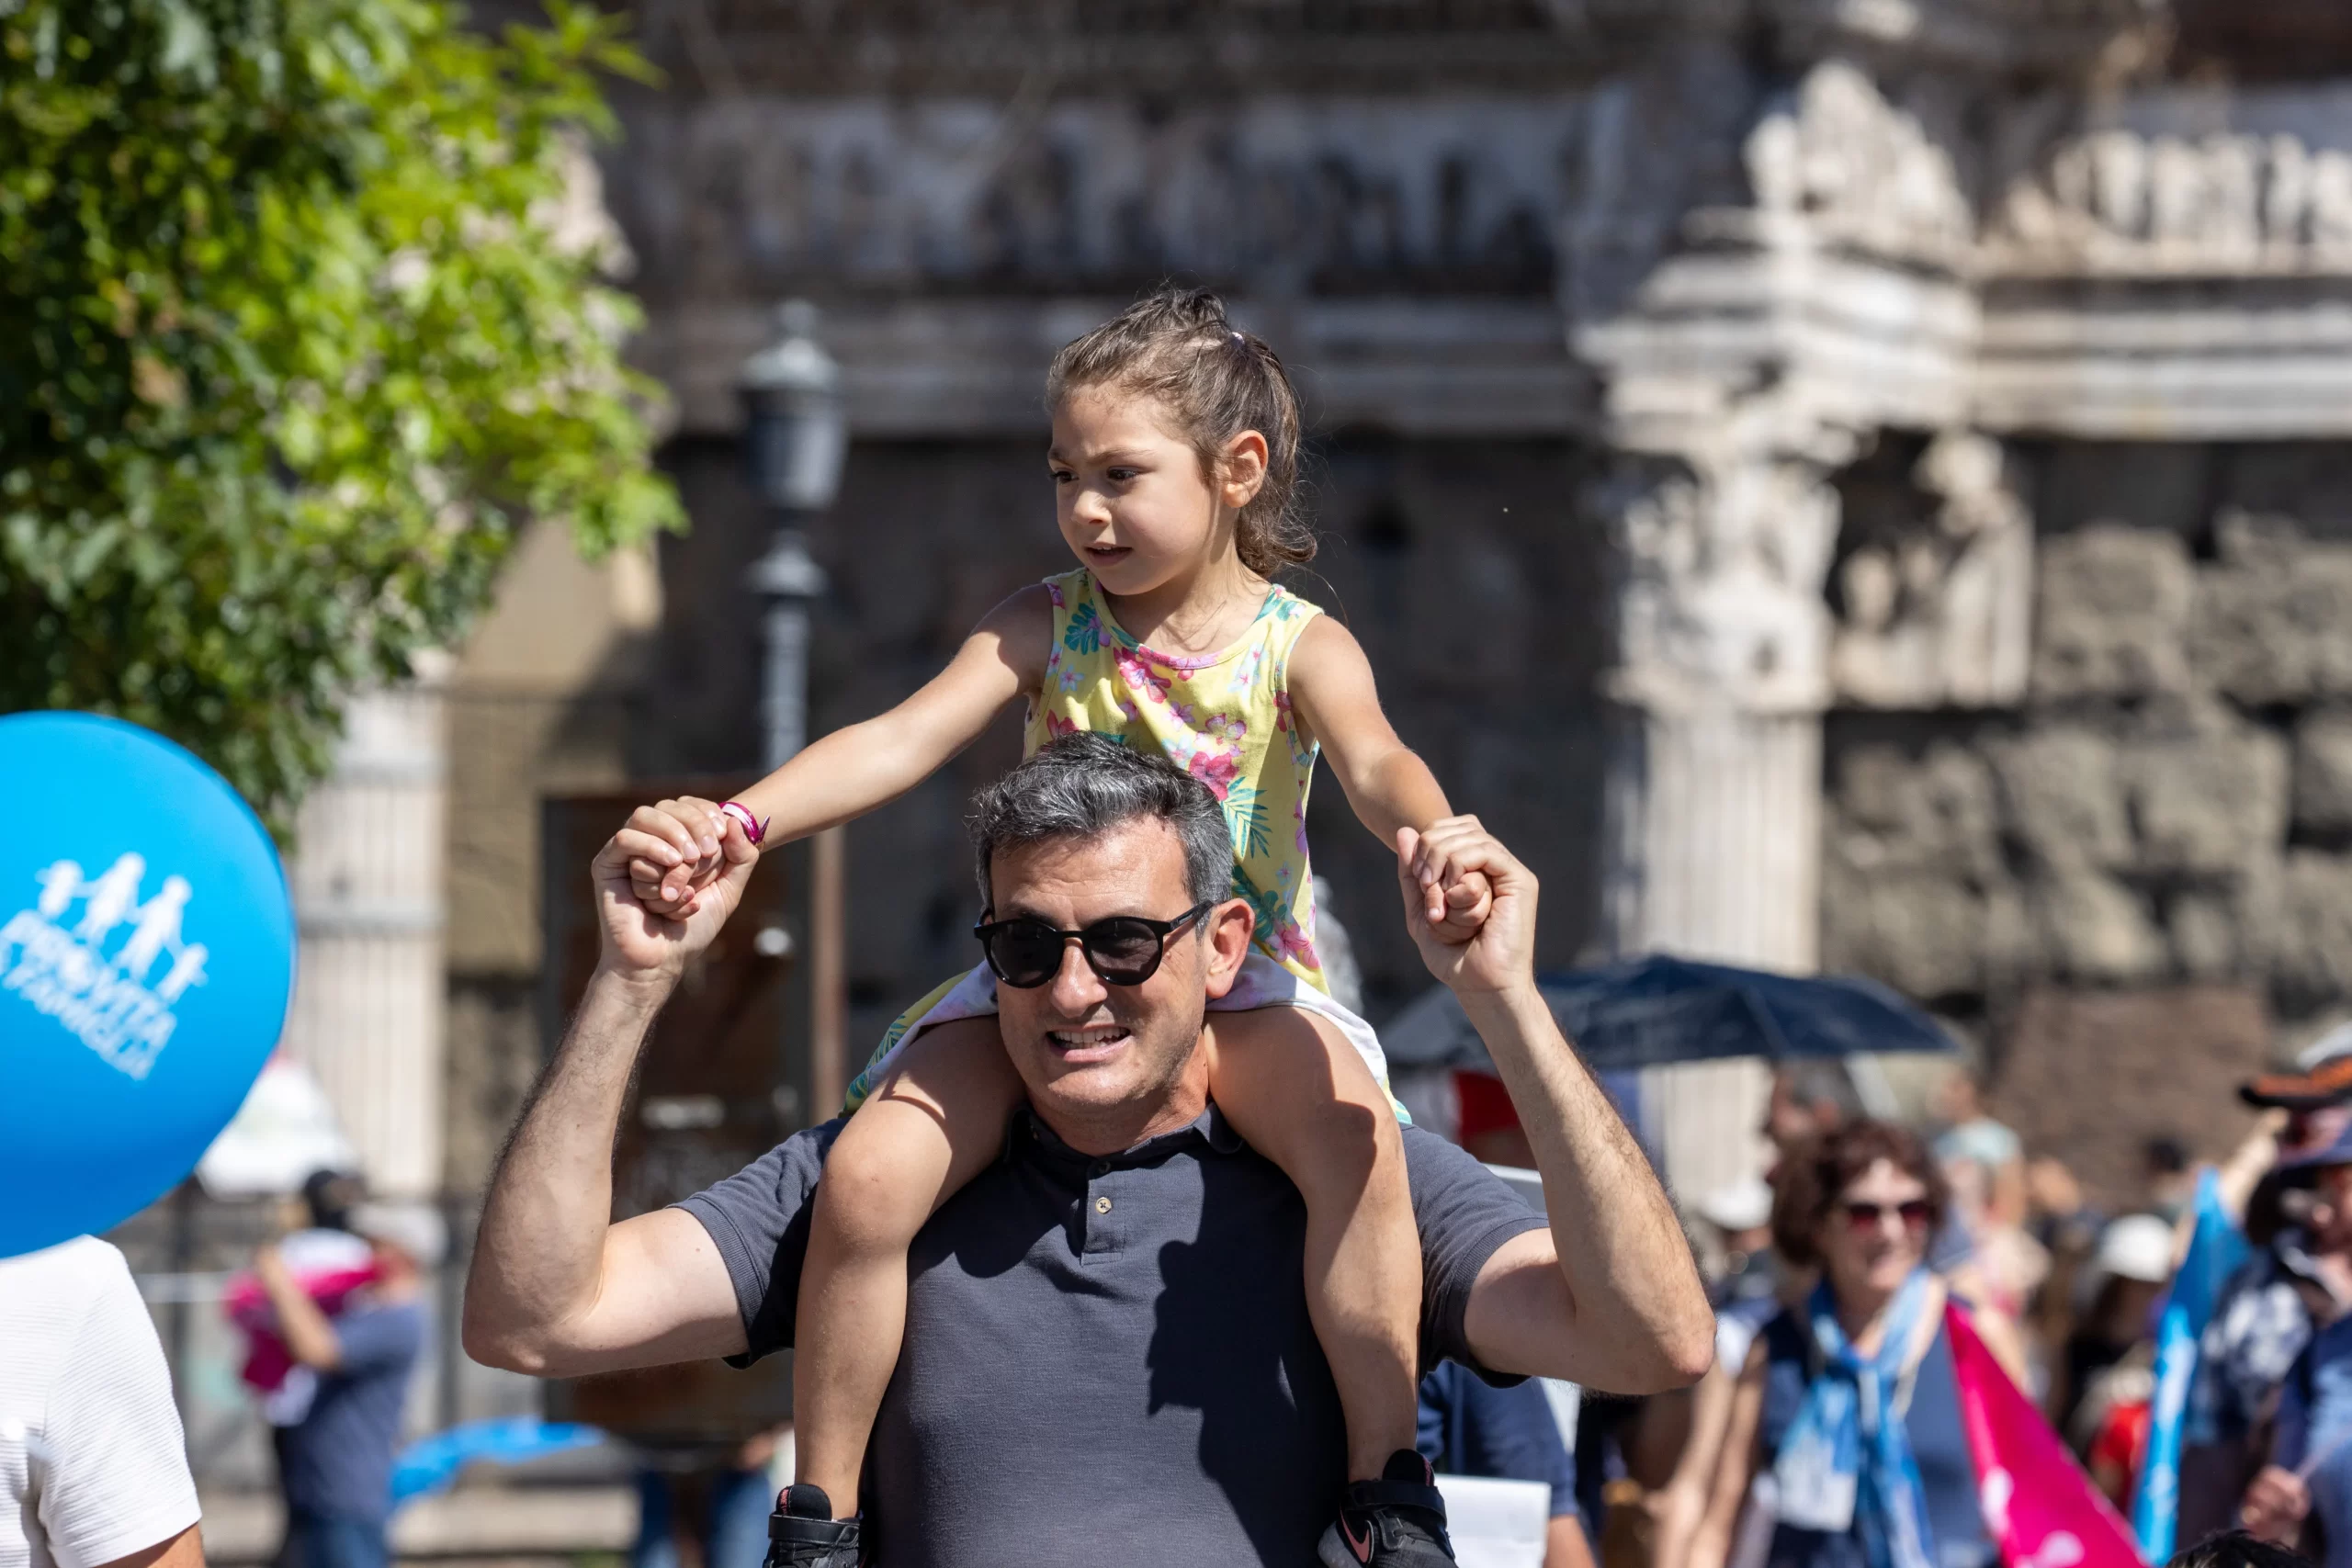 Many young families joined the march for life in Rome. Credit: Daniel Ibáñez